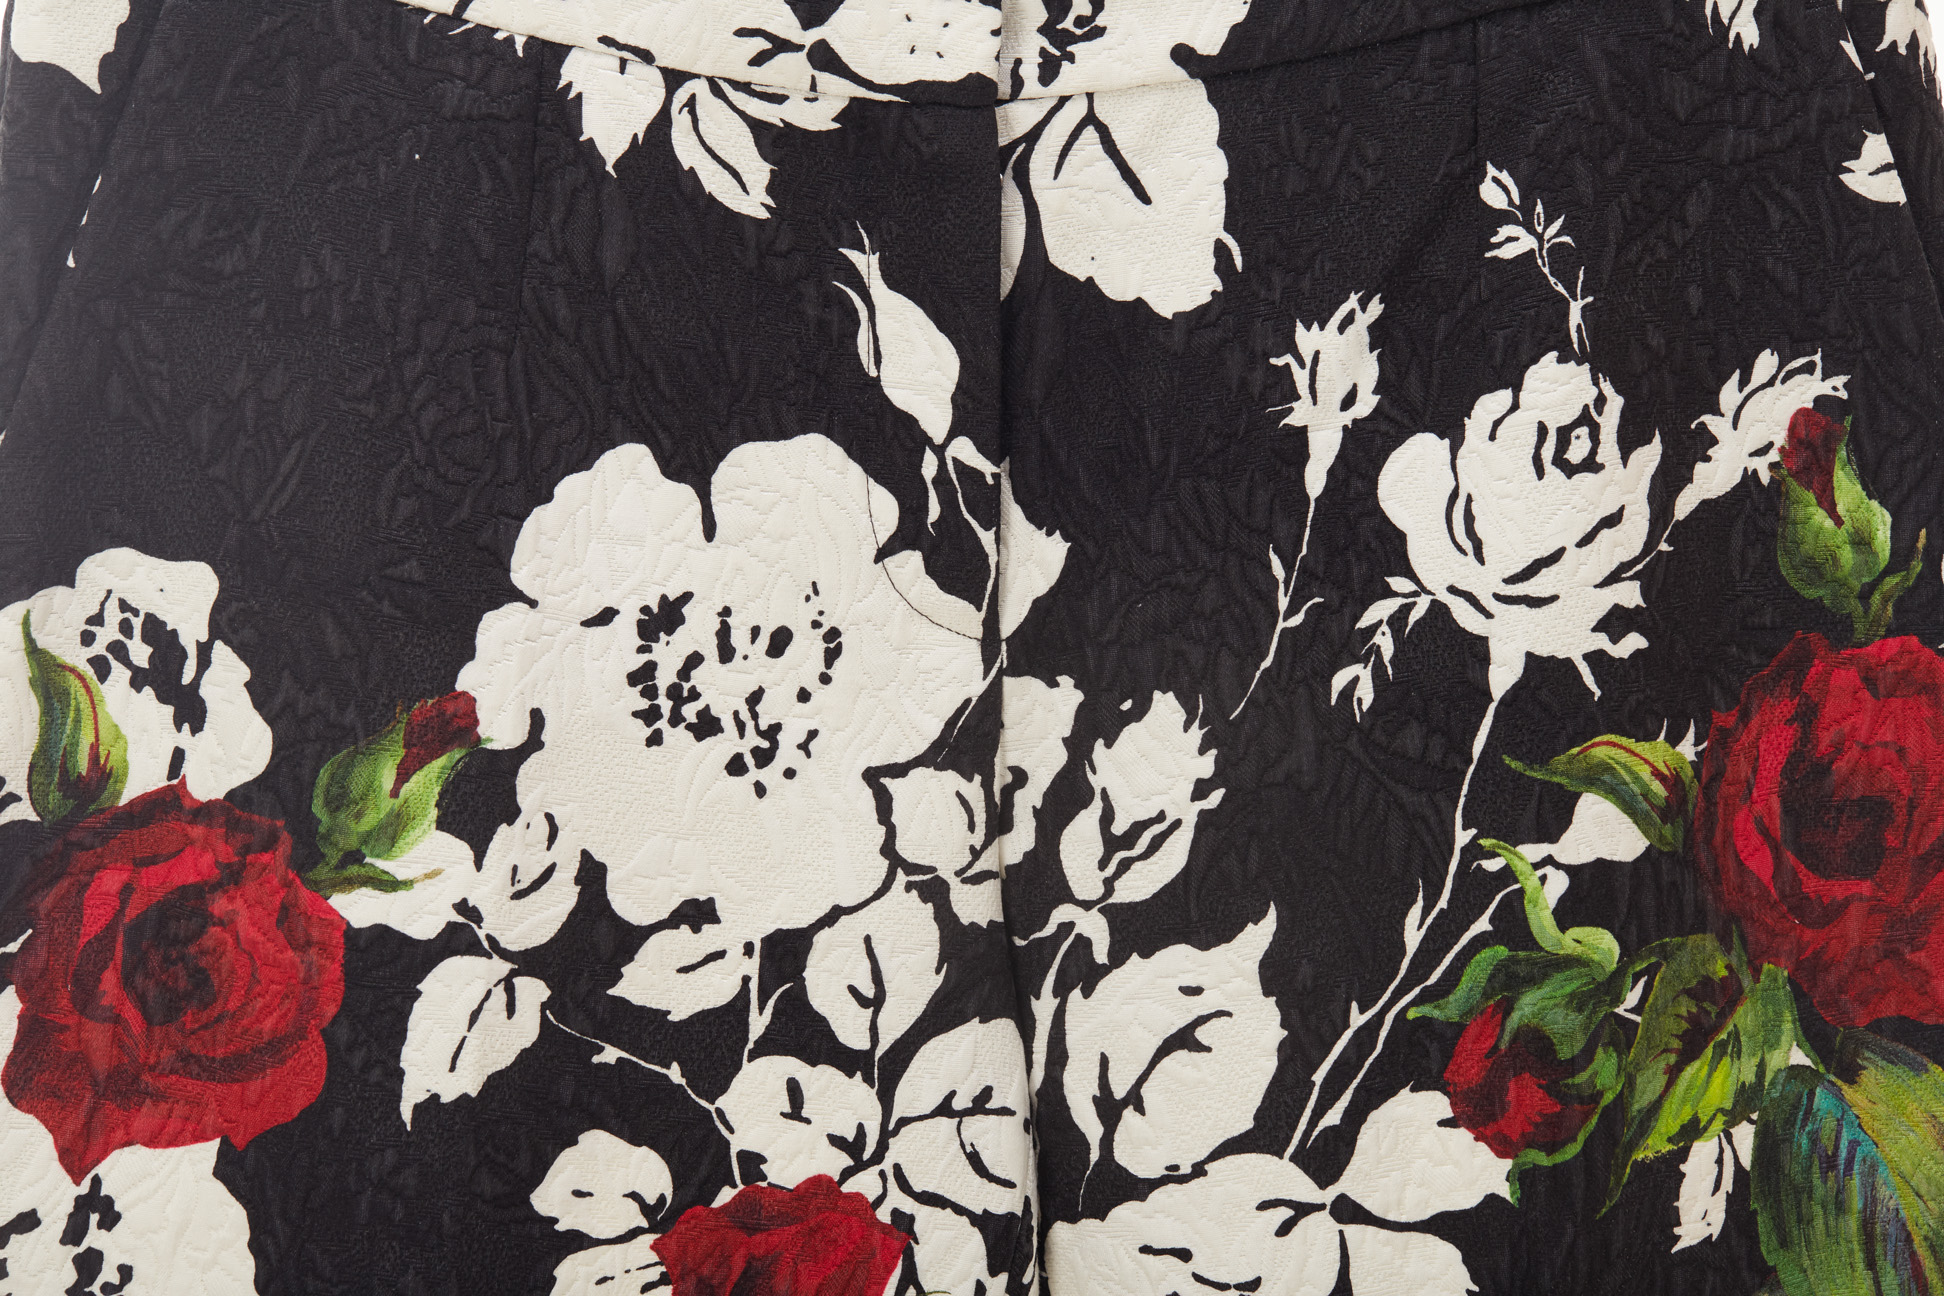 A PAIR OF BLACK DOLCE & GABBANA ROSE PATTERNED TROUSERS - Image 2 of 3